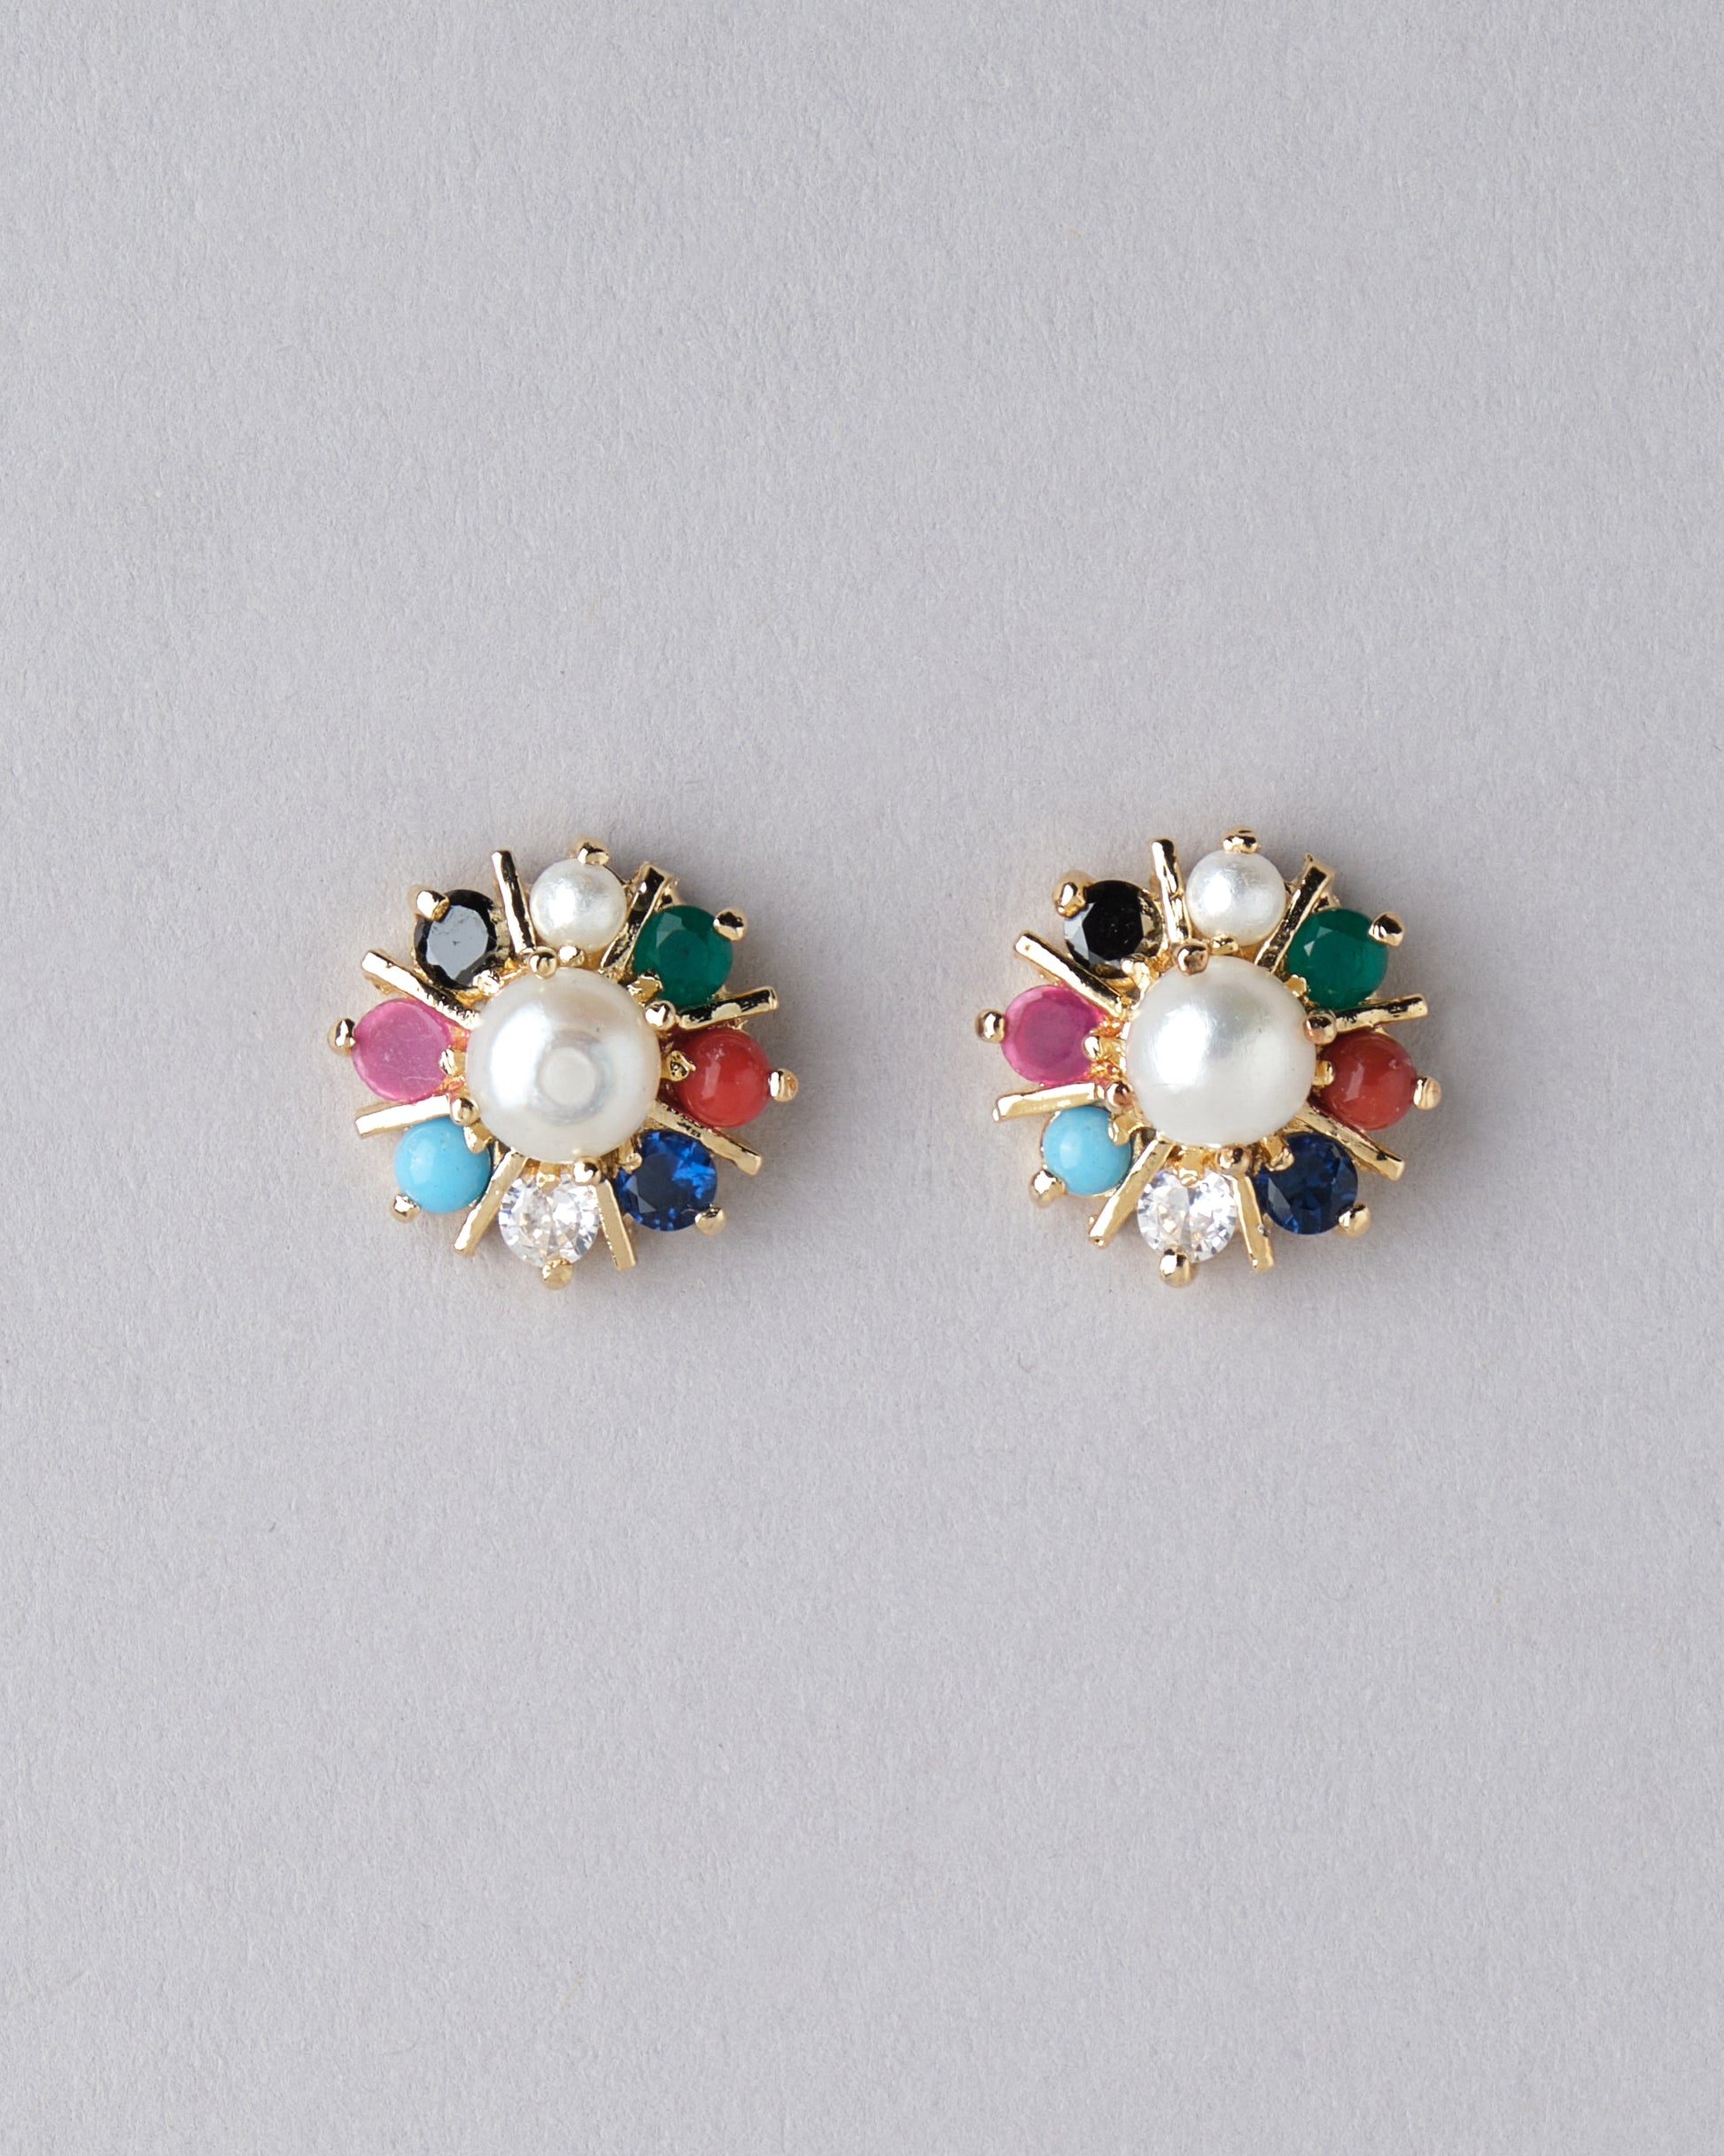 A pair of Navratan CZ Stud Earrings by Chandrani Pearls India with different colored stones.